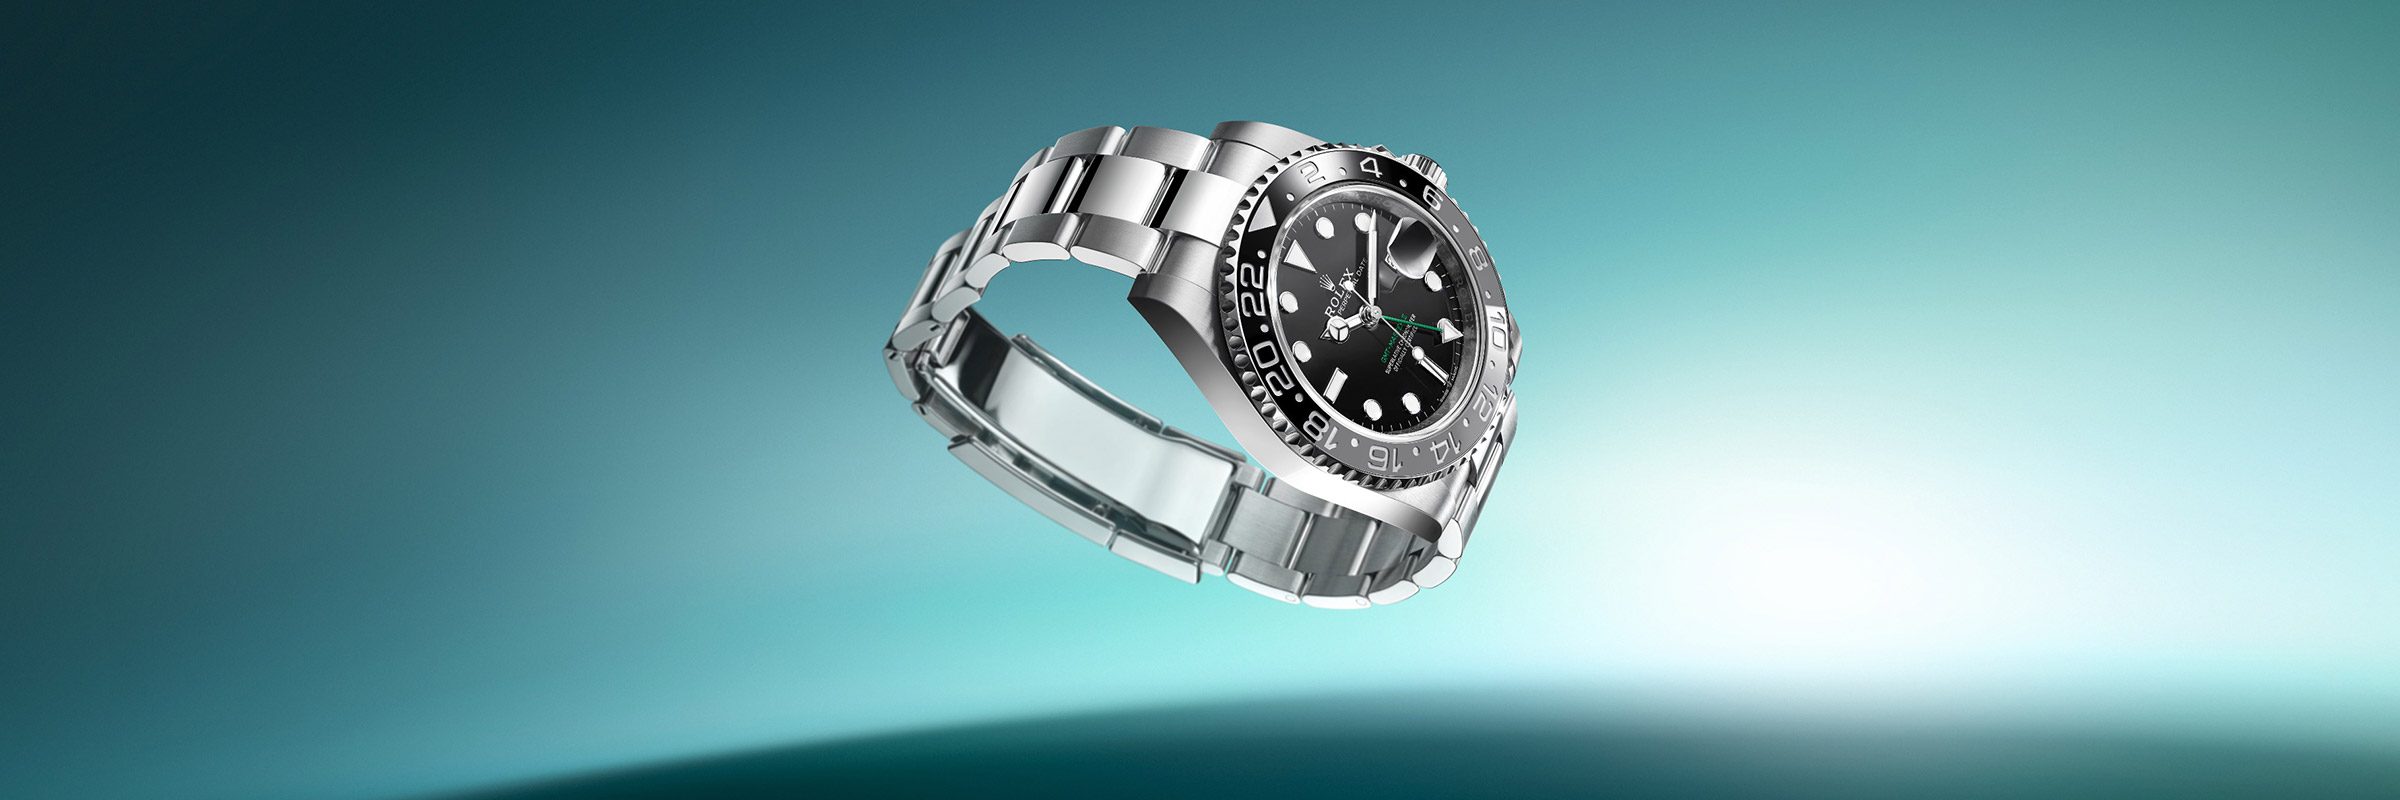 rolex watches in liverpool, london & manchester - david m robinson